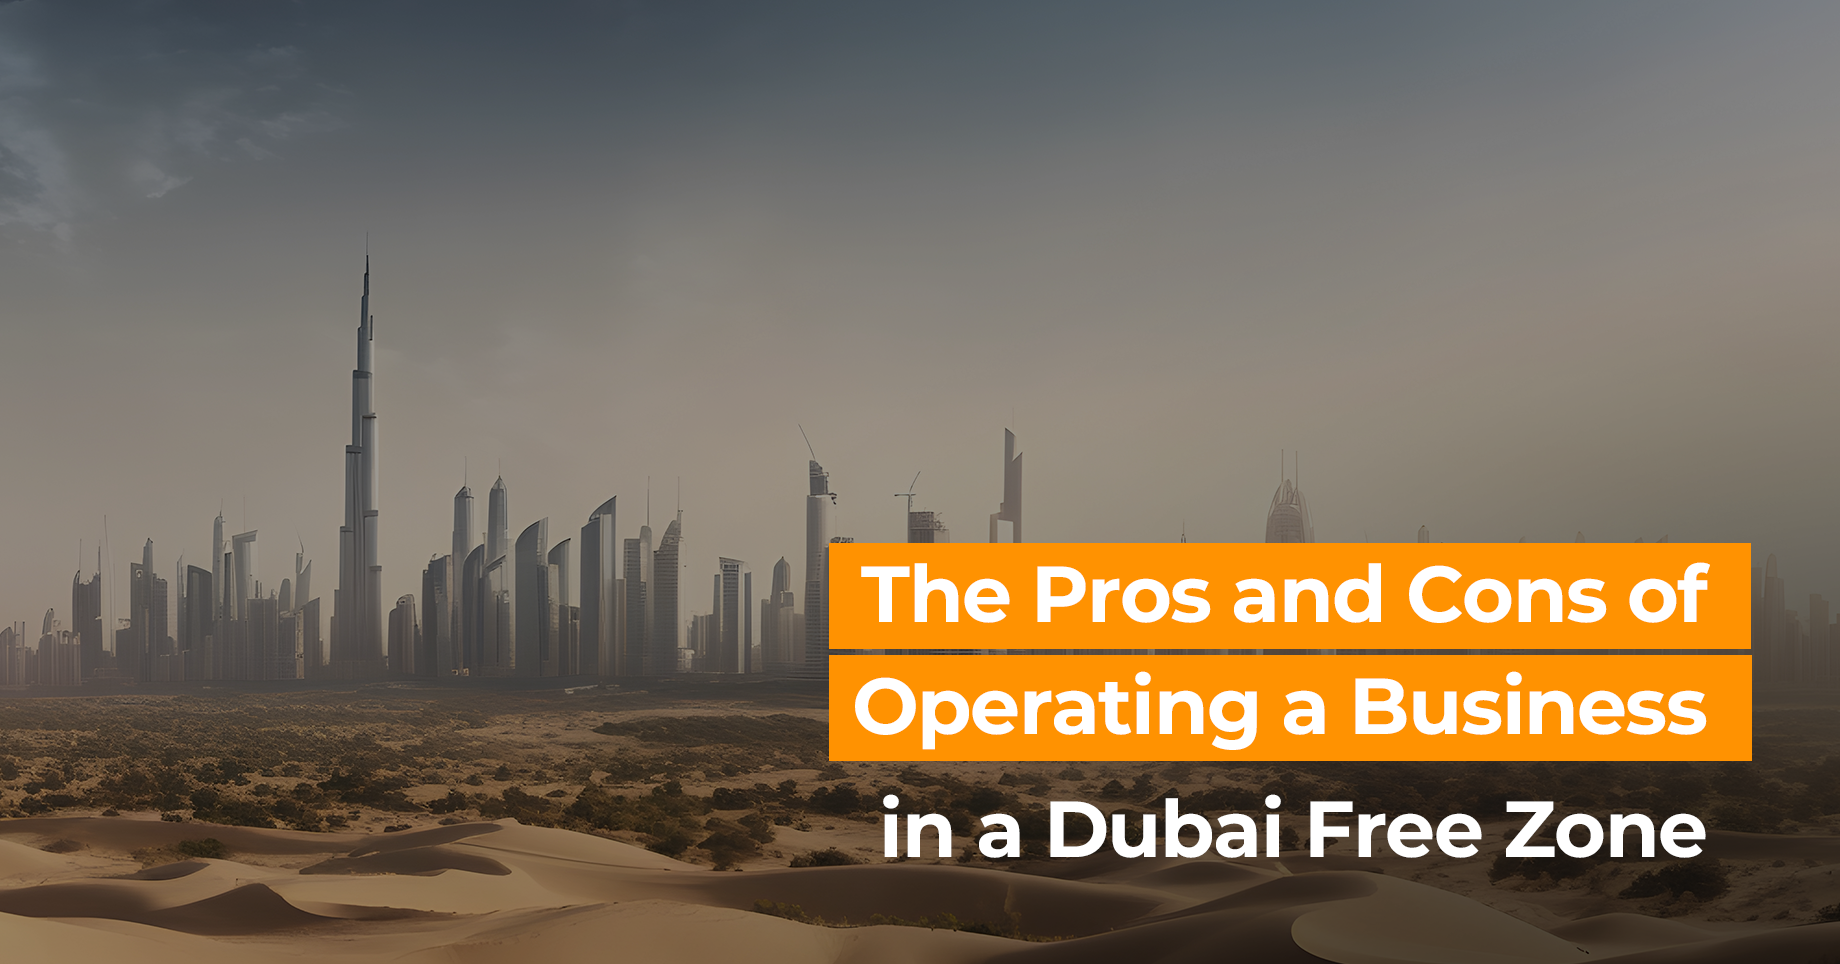 The Pros and Cons of Operating a Business in a Dubai Free Zone